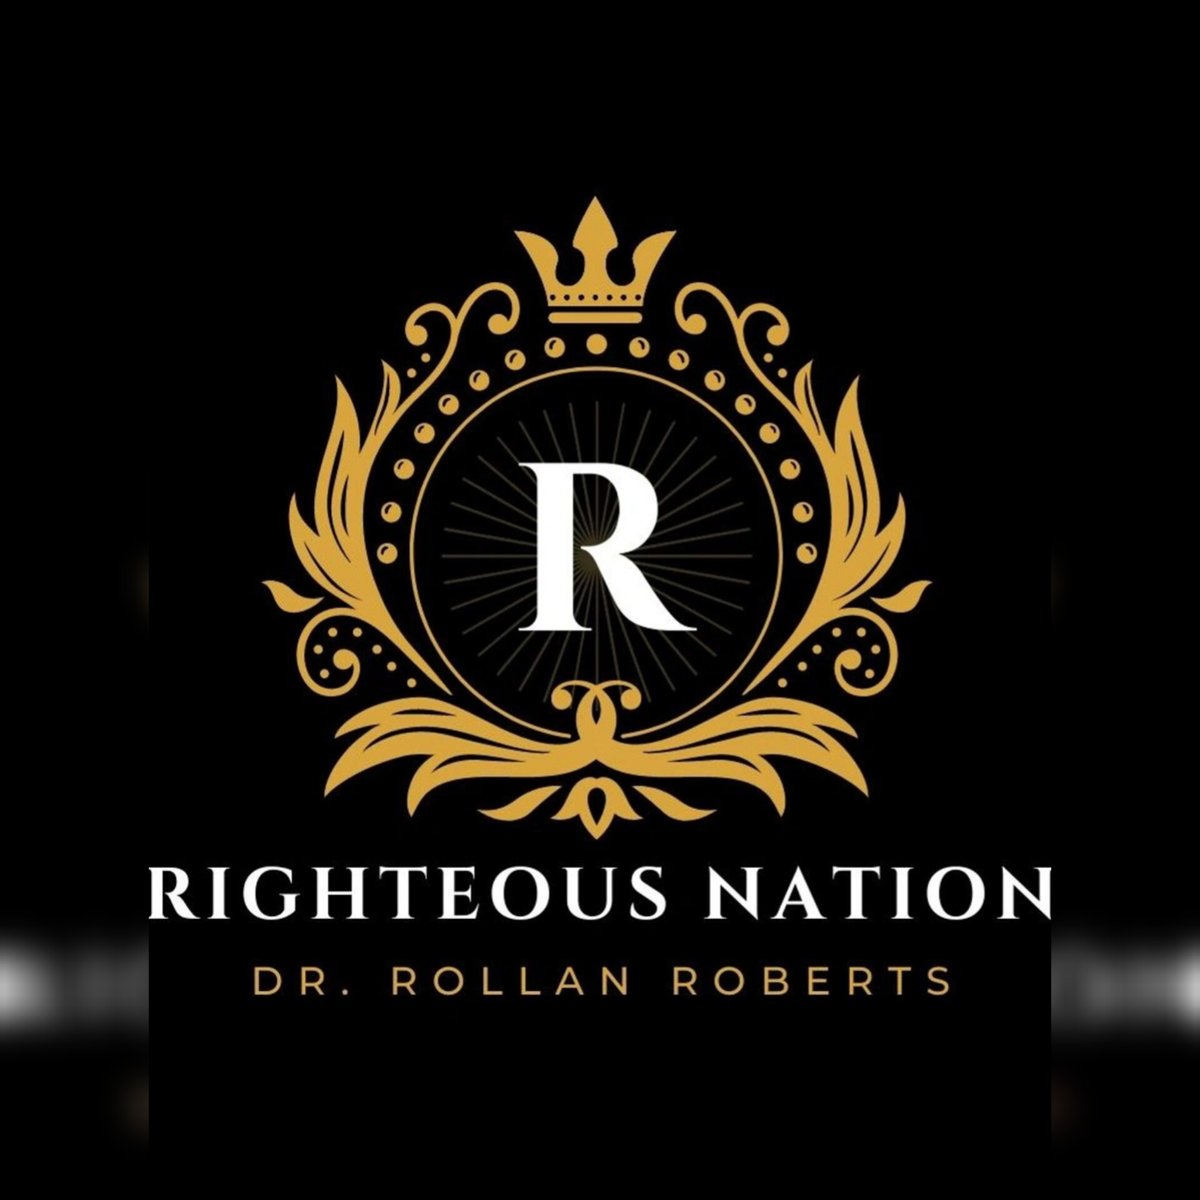 Under the visionary leadership of Dr. Rollan Roberts II, a U.S. Presidential candidate and a respected voice in foreign affairs and moral leadership, the Righteous Nation Center is dedicated to advancing the Kingdom of God's principles on earth. #Vision righteousnation.org